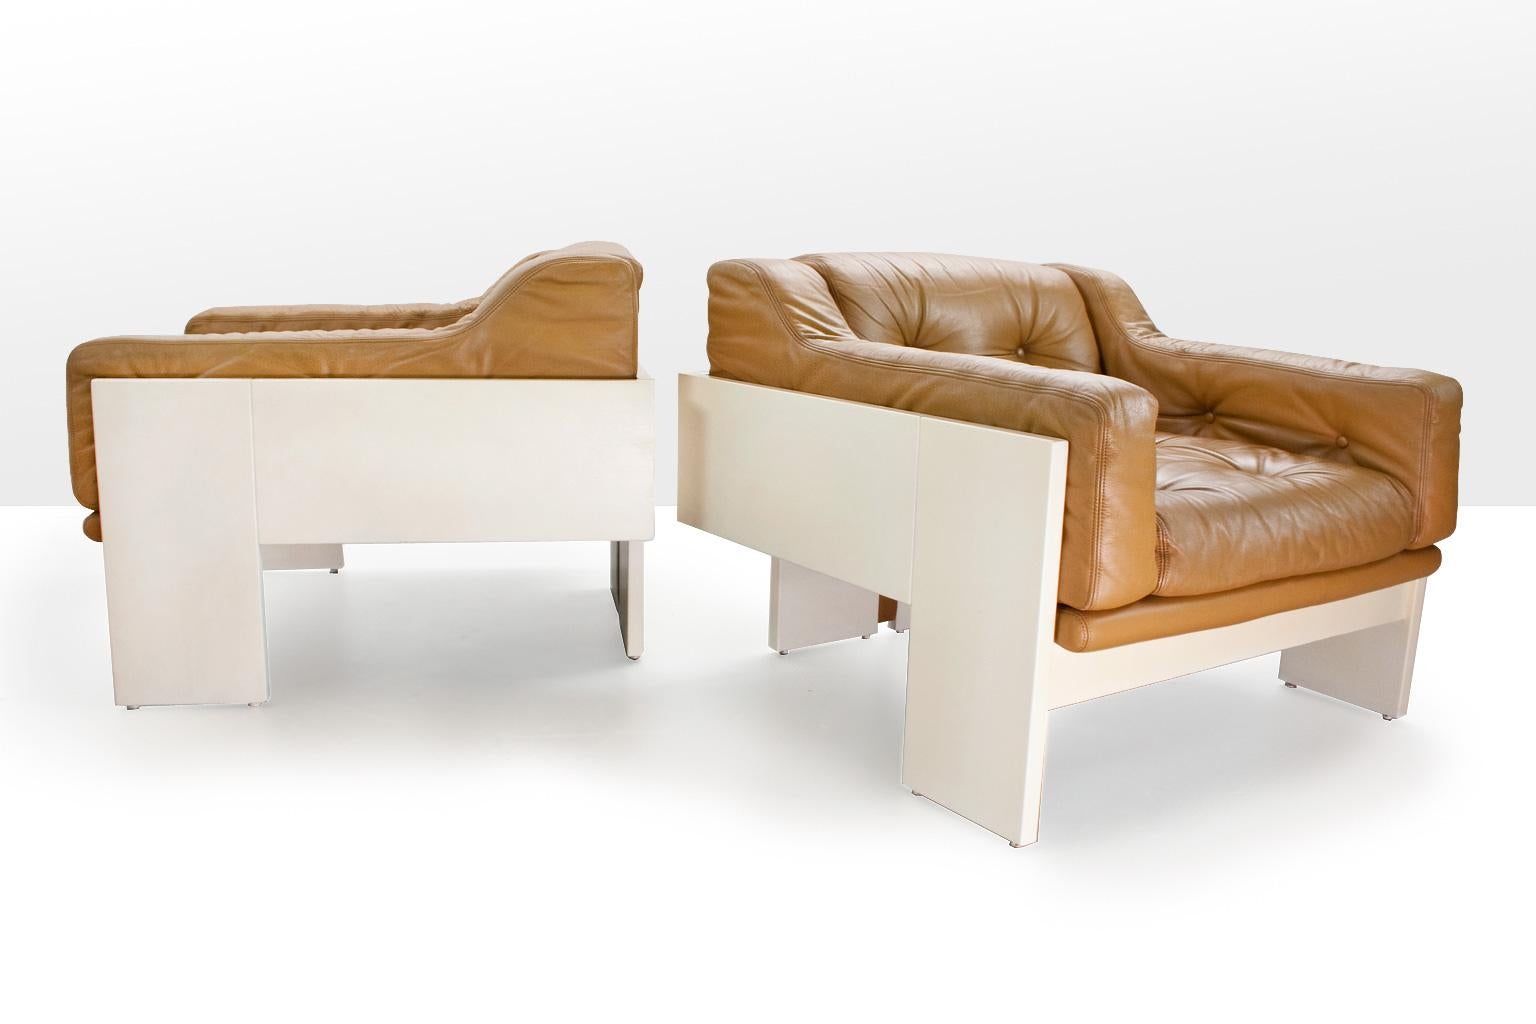 Mid-Century Modern cognac colored leather lounge chairs model 'Oriolo' by Claudio Salocchi for Sormani, Italy, 1963. 

The items are well conditioned, the comfortable original patinated cognac leather is well preserved. The 'T-shaped wooden frame'